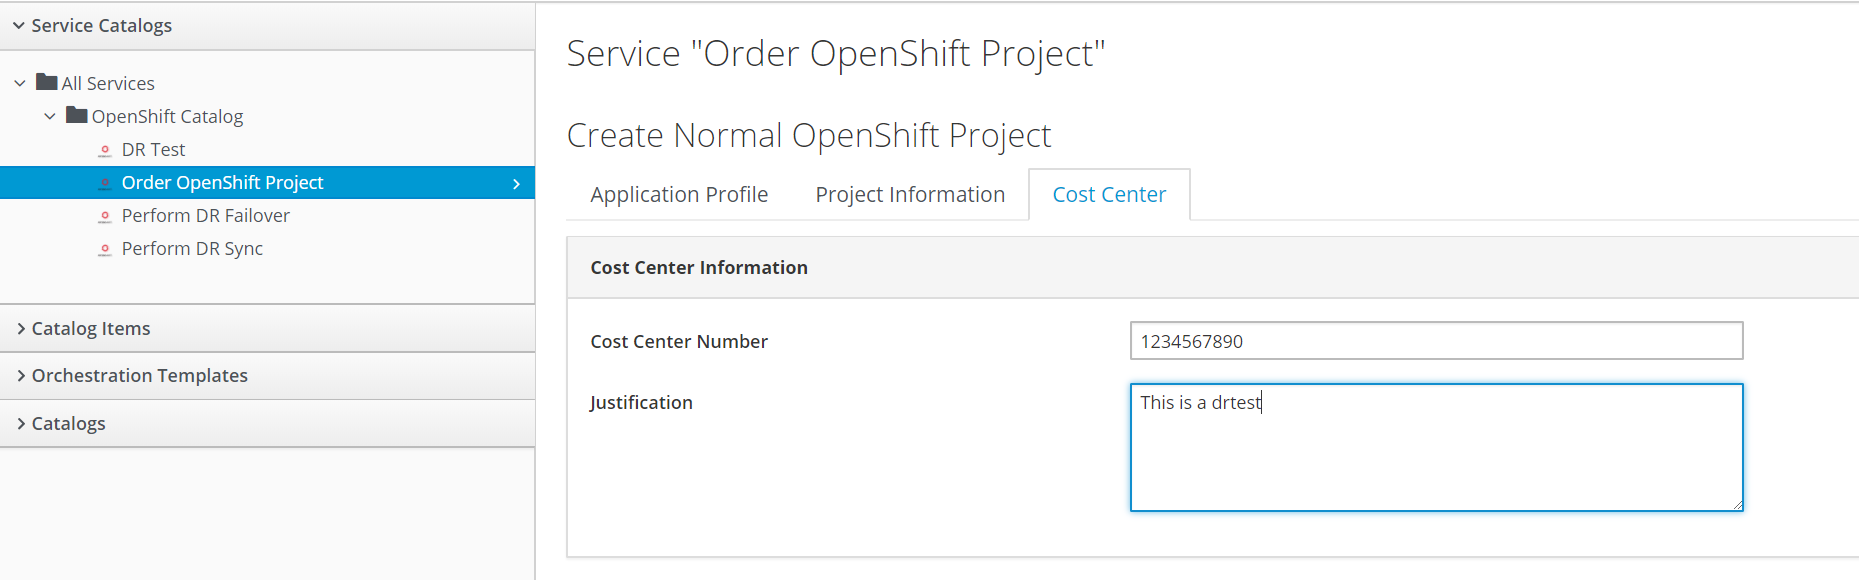 openshift_project_order3